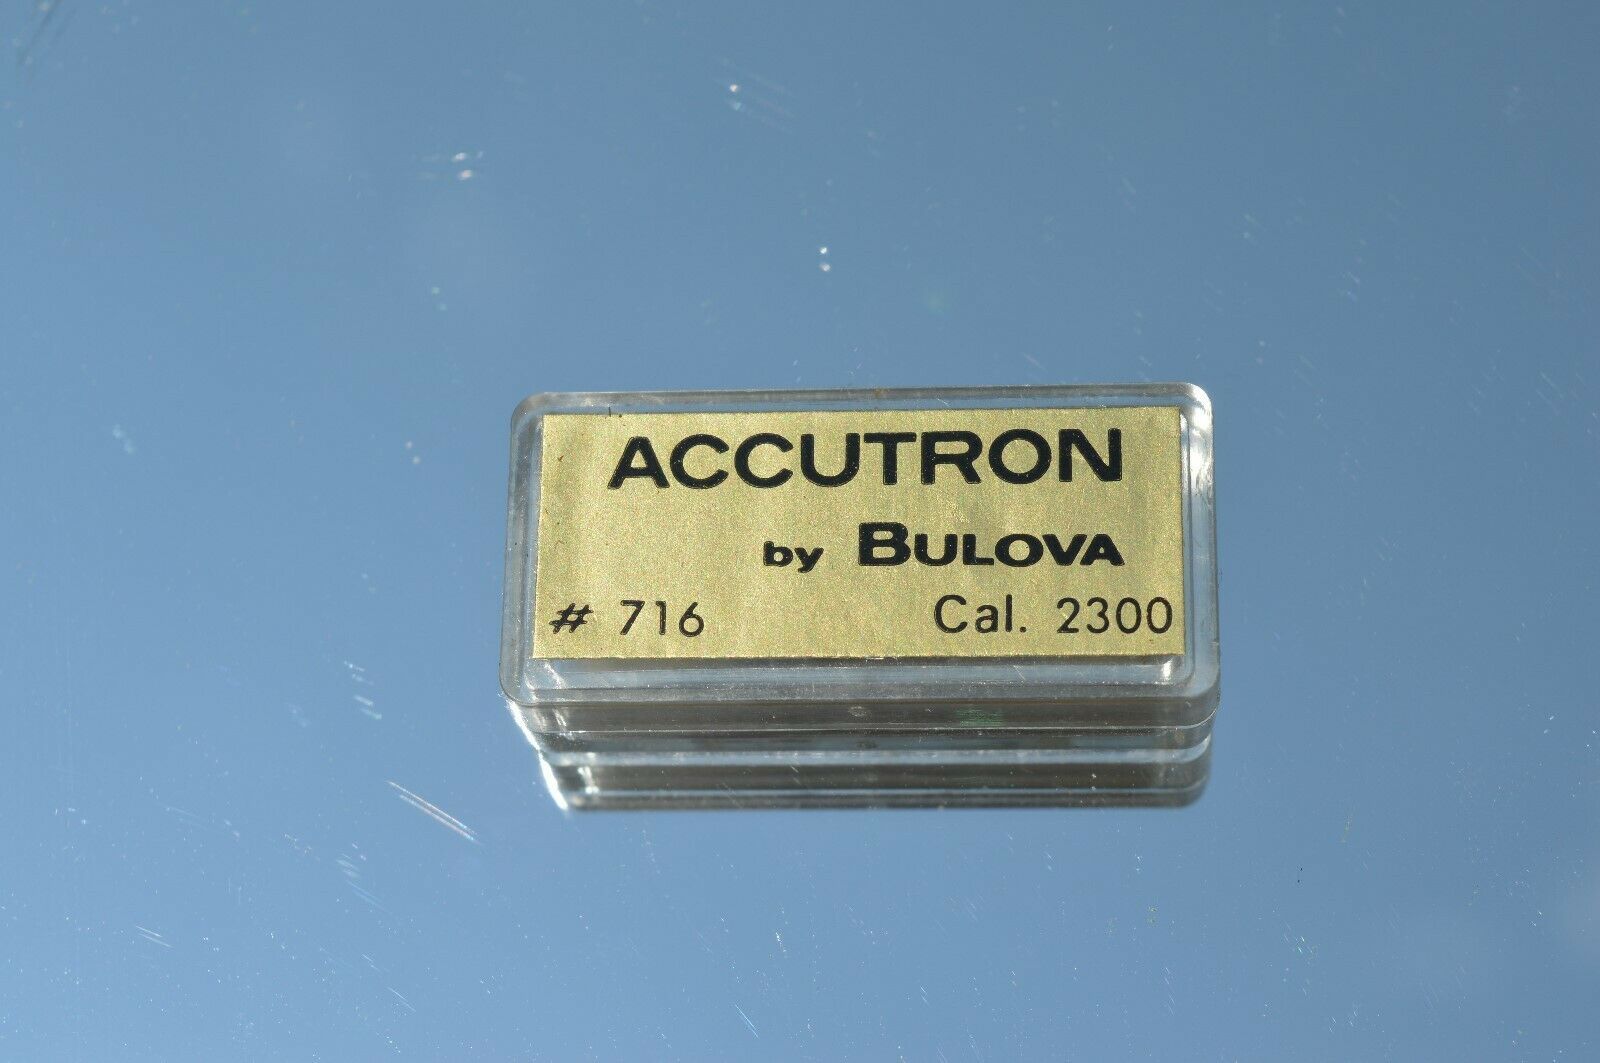 New Old Stock BLUOVA ACCUTRON #716 Cal. 2300 Tuning Fork Assembly IN BOX - $18.66